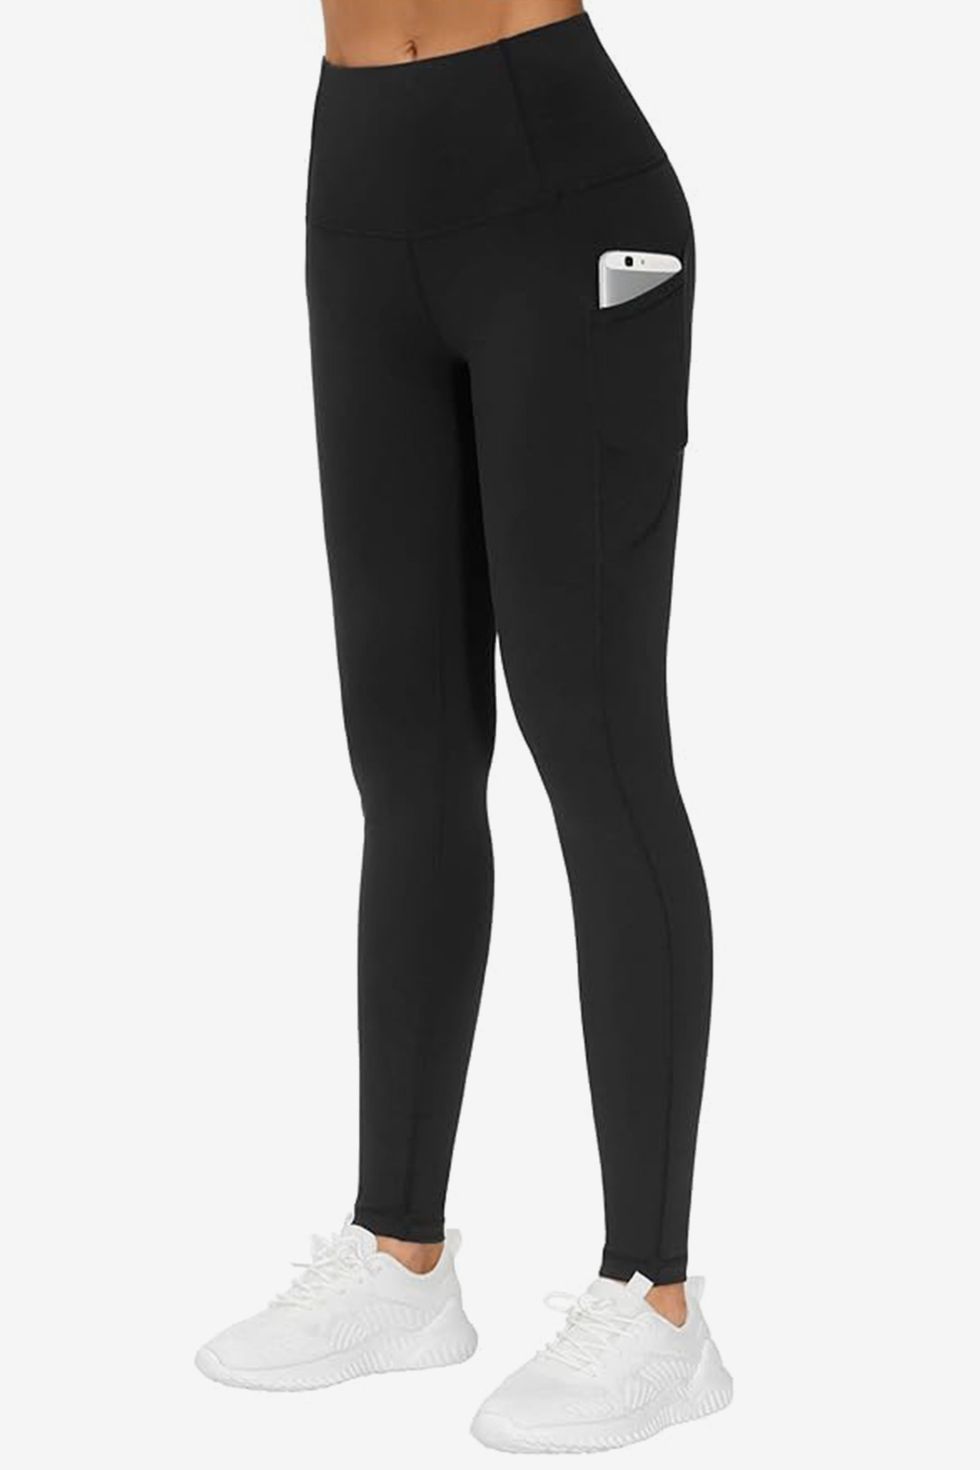 I'm 5' 11 and I swear by these $17 Costco yoga pants